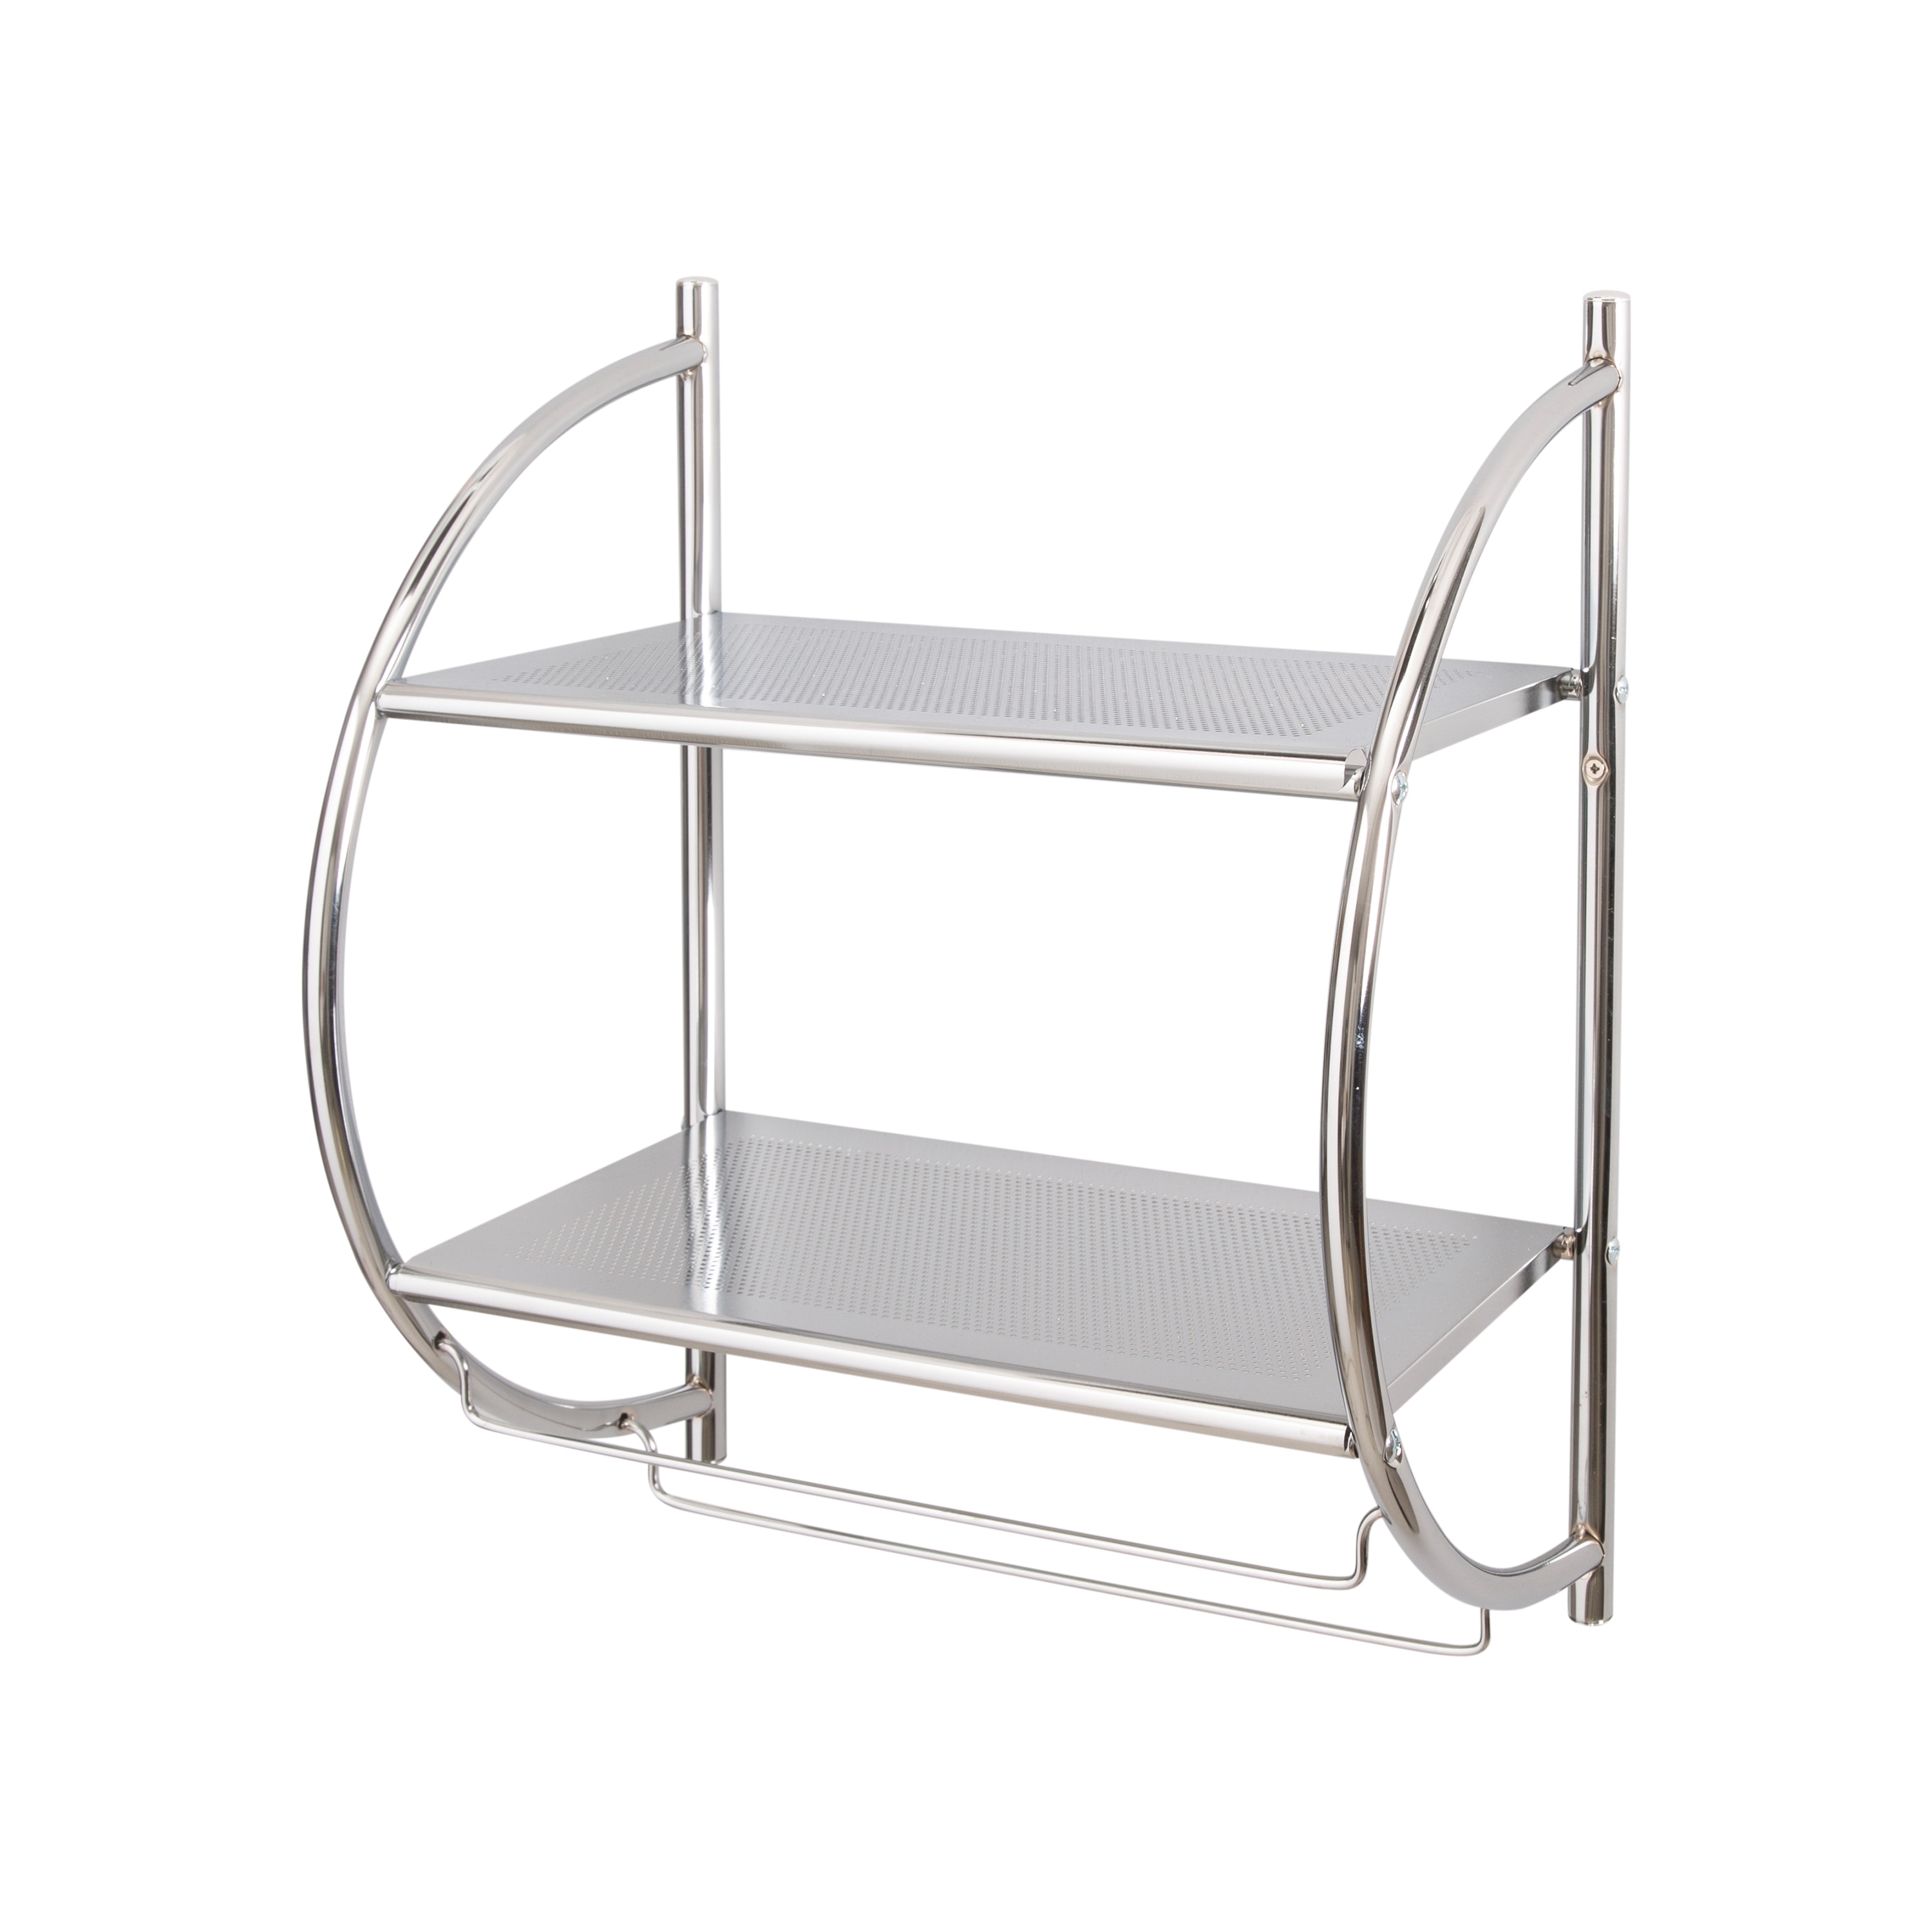 https://ak1.ostkcdn.com/images/products/is/images/direct/d52ade6a47c66d670dca6821b3768331ec0aea40/Neu-Home-2-Tier-Wall-Mount-Shelf-with-Towel-Bars.jpg